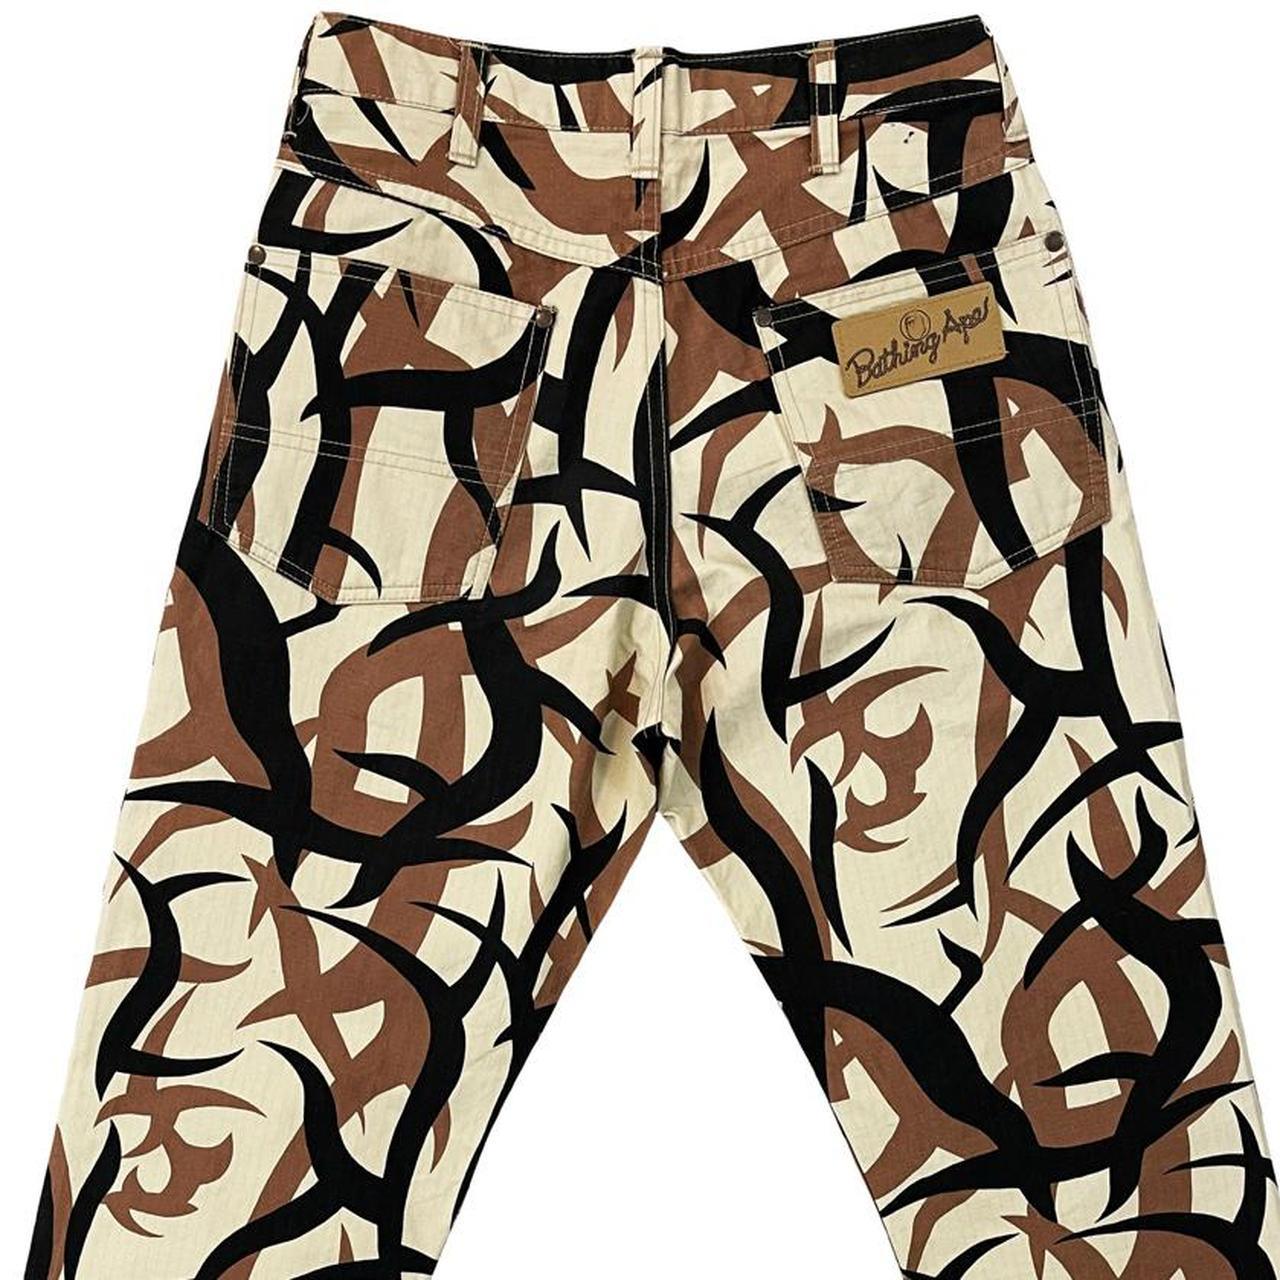 Bape Tribal Jeans - Known Source